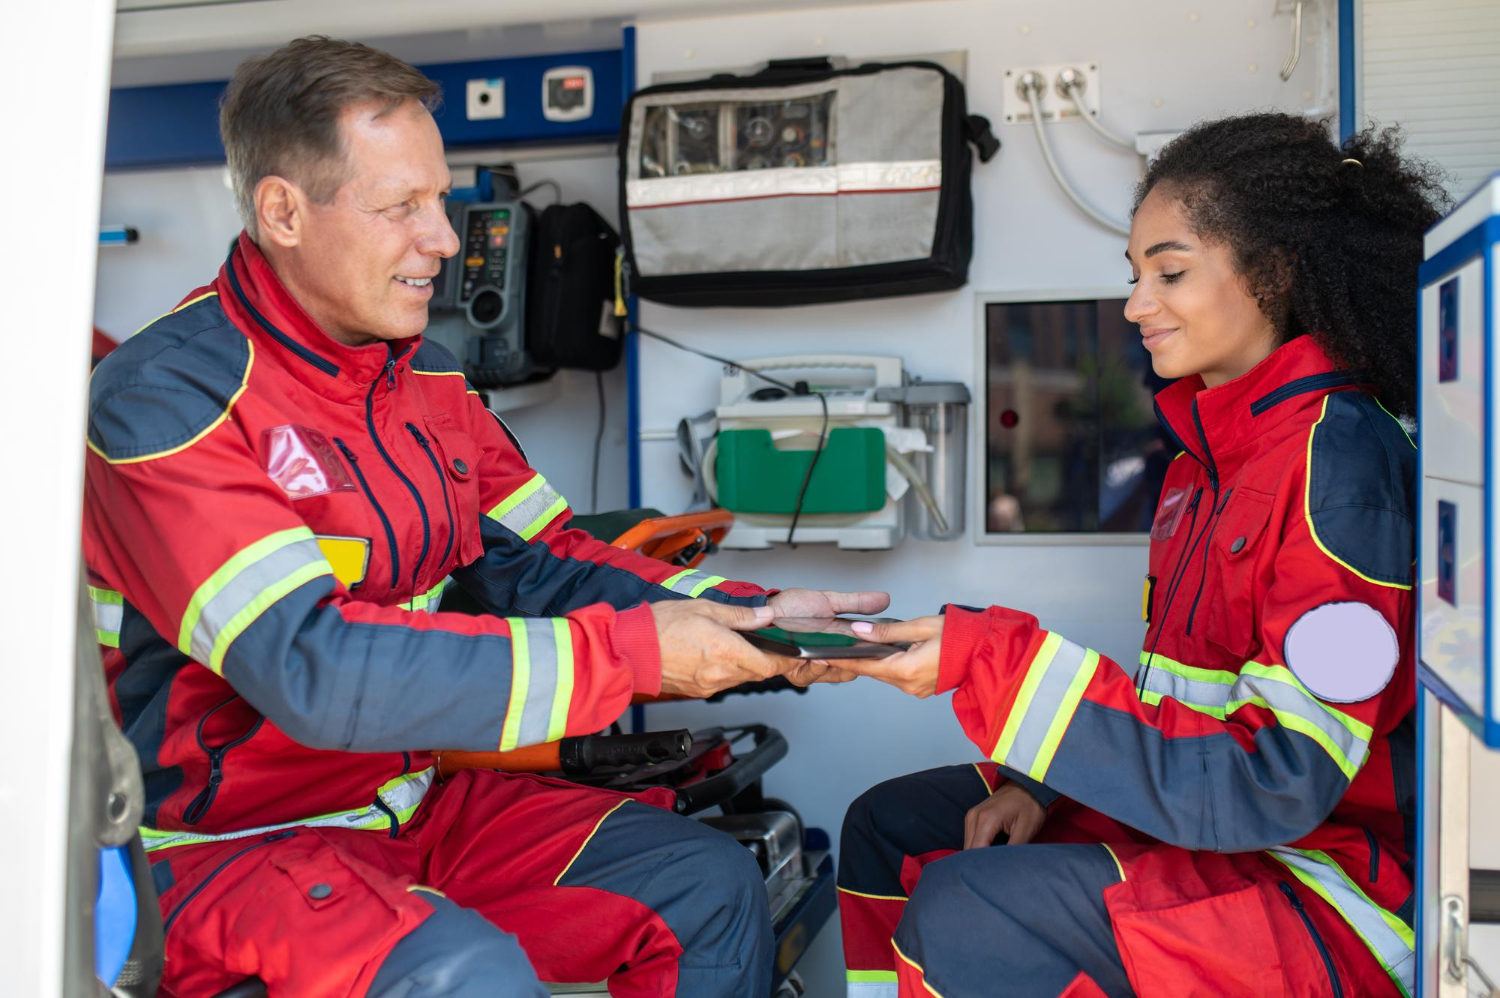 Two EMS workers sitting in an ambulance, wearing red and gray EMS uniforms. A male paramedic hands a tablet to a younger female paramedic.